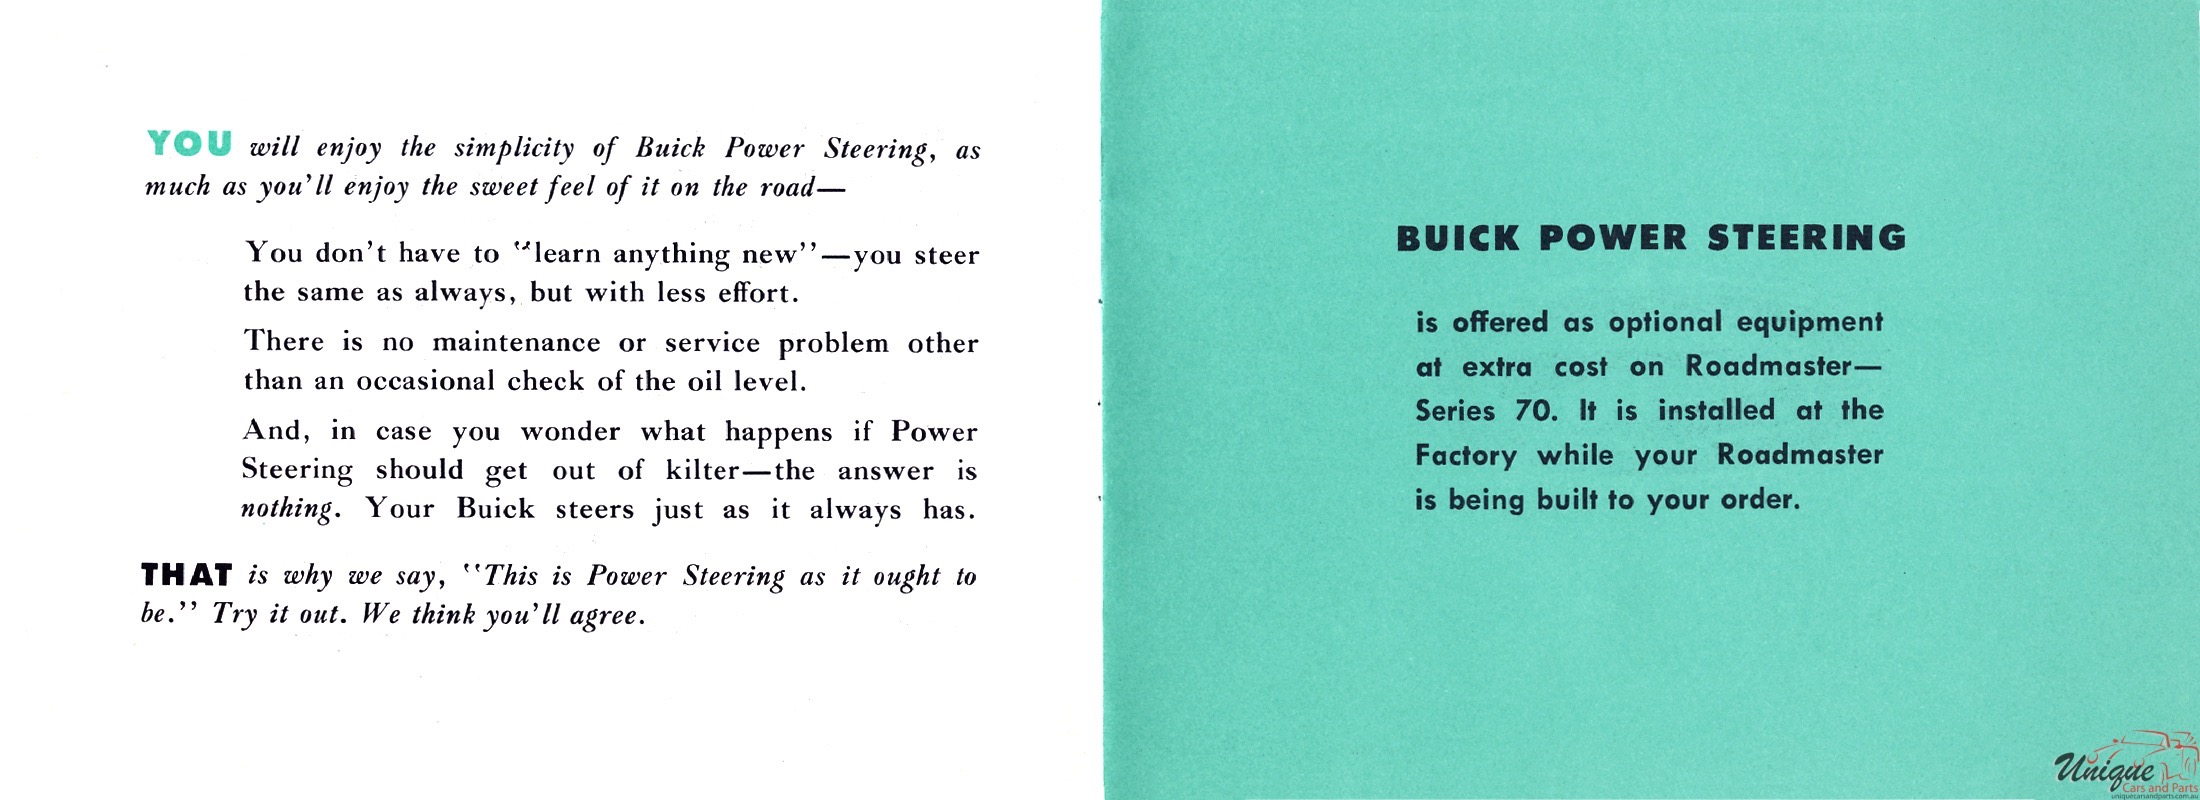 1952 Buick Power Steering Folder Page 1